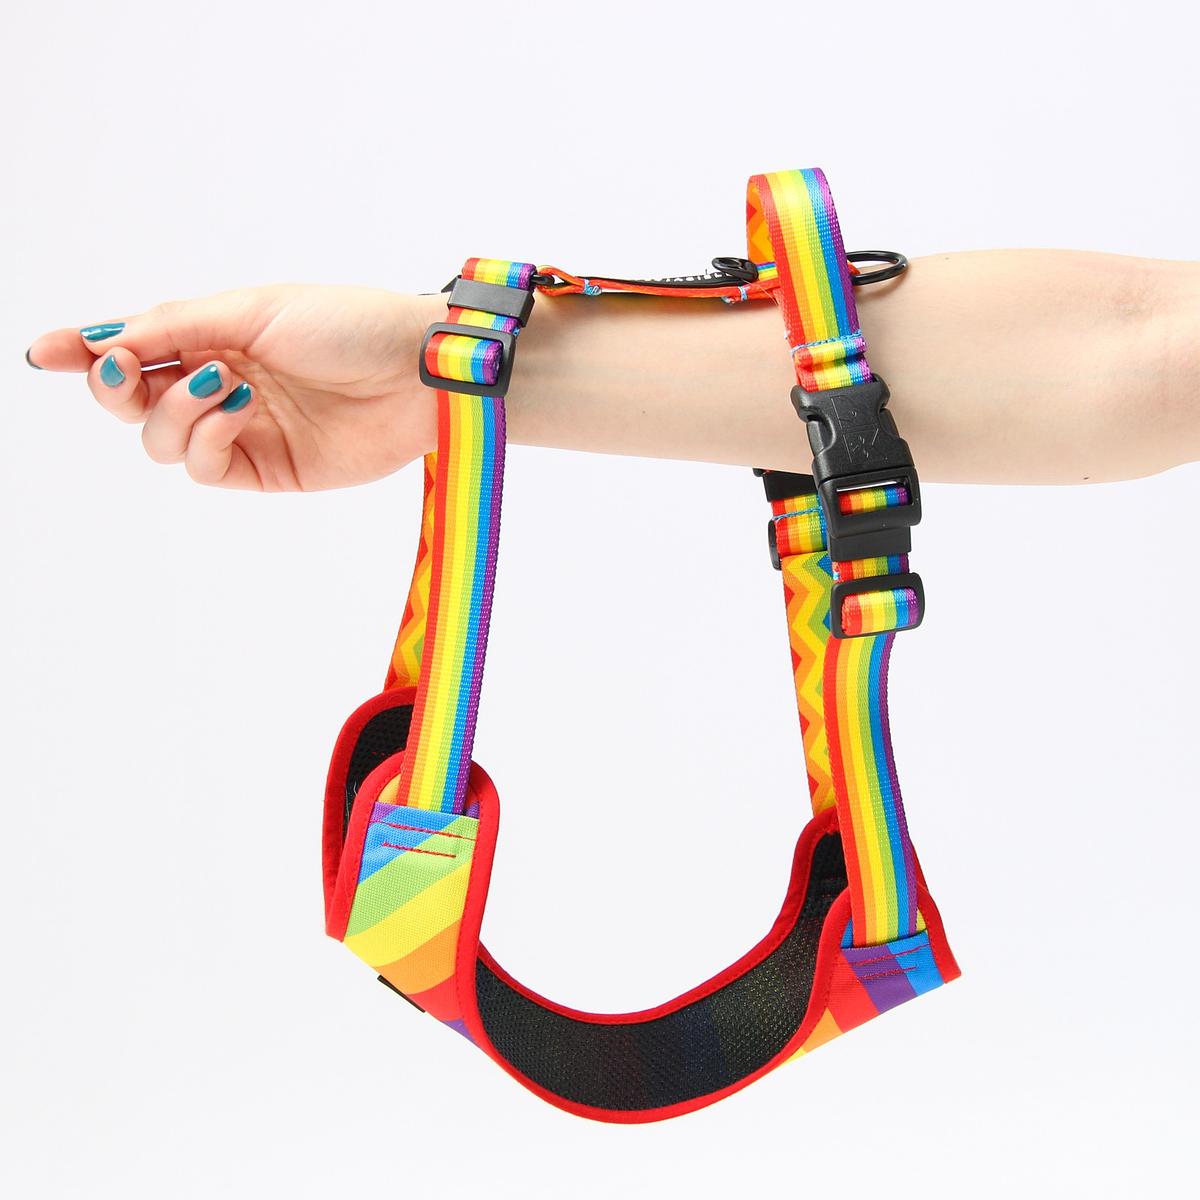 Stay-on pressure-free harness "Love, Equality, Teethers"